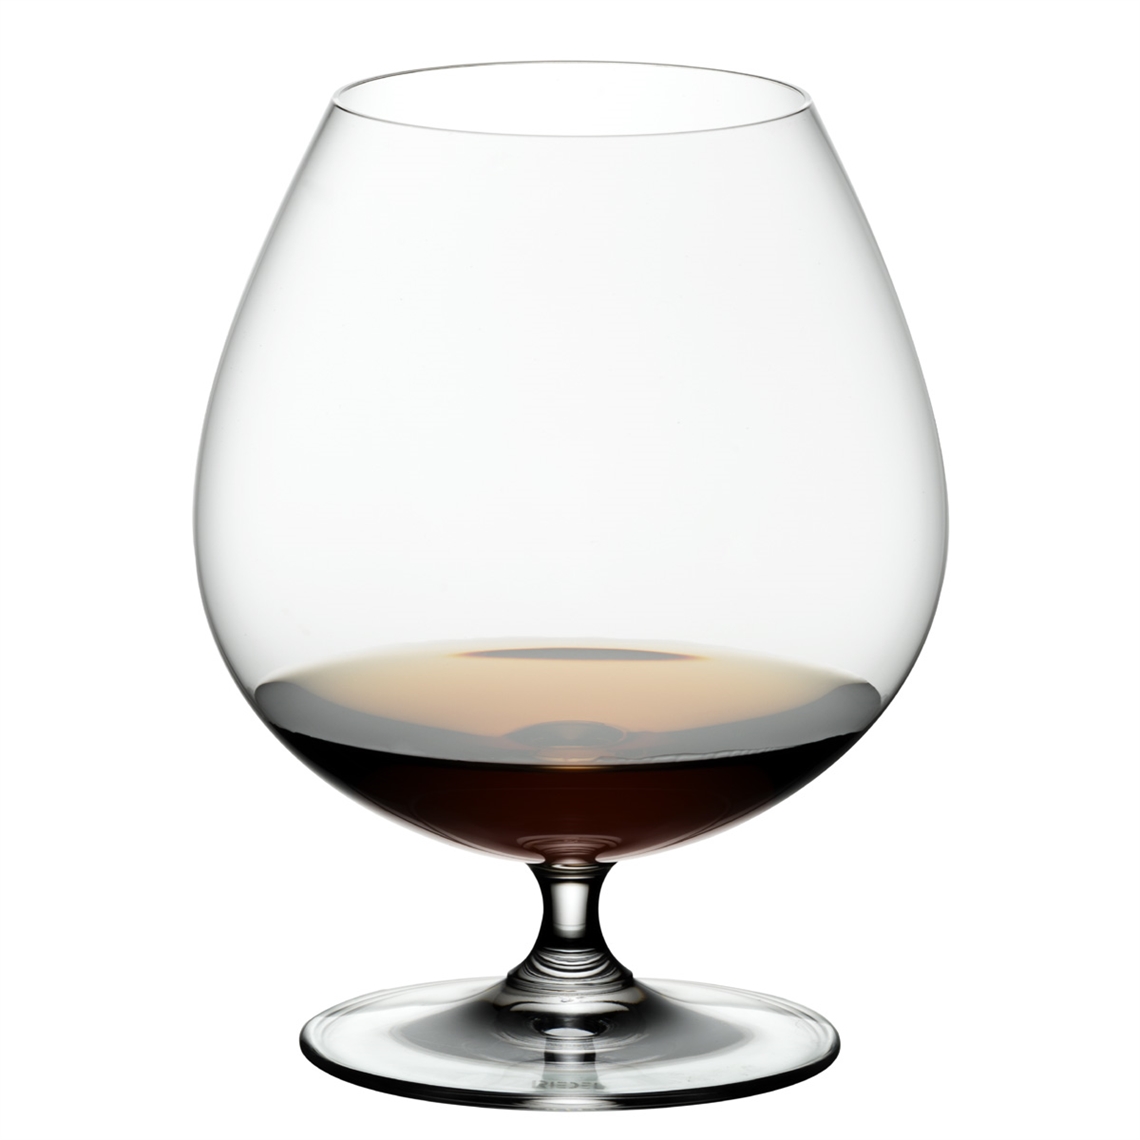 View more shiraz and syrah wine glasses from our Spirit Glasses range